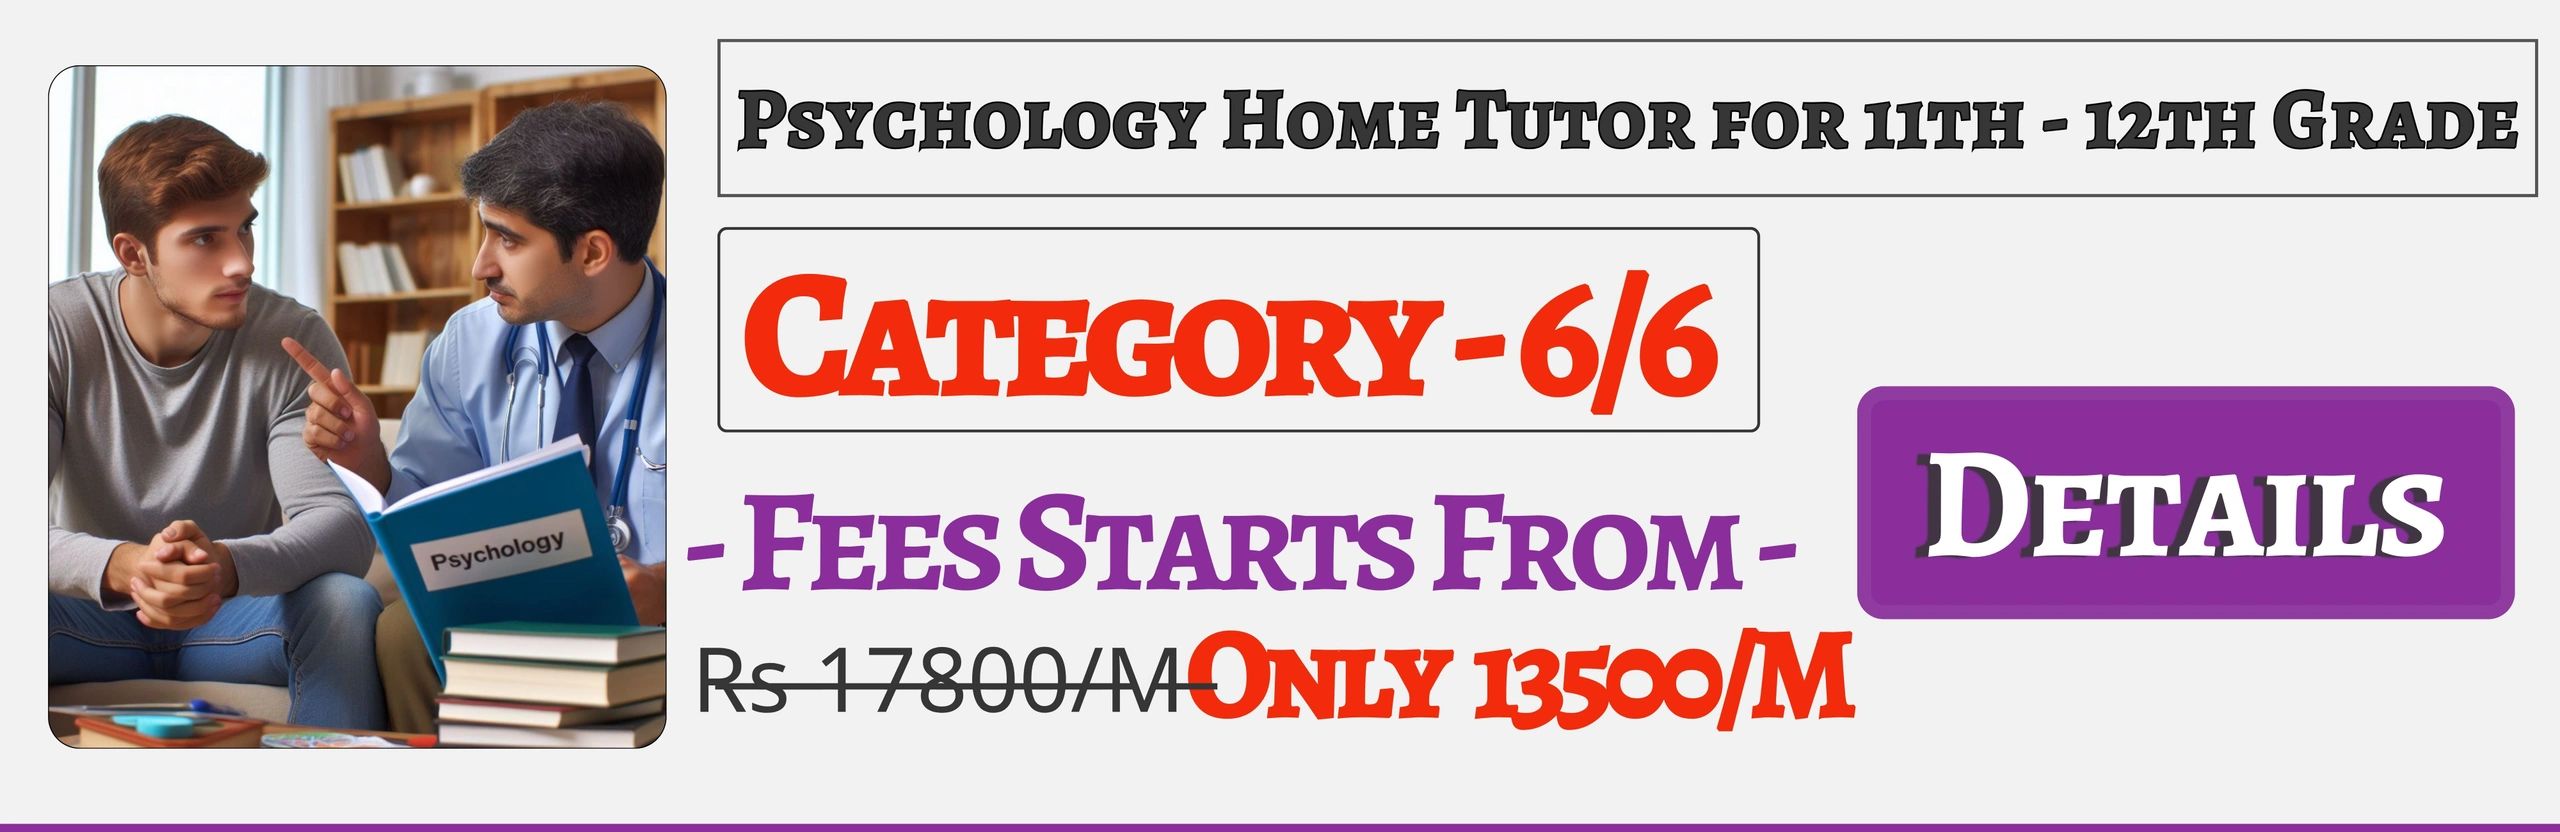 Book Best Nearby Psychology Home Tuition Tutors For 11th & 12th In Jaipur , Fees Only 13500/M